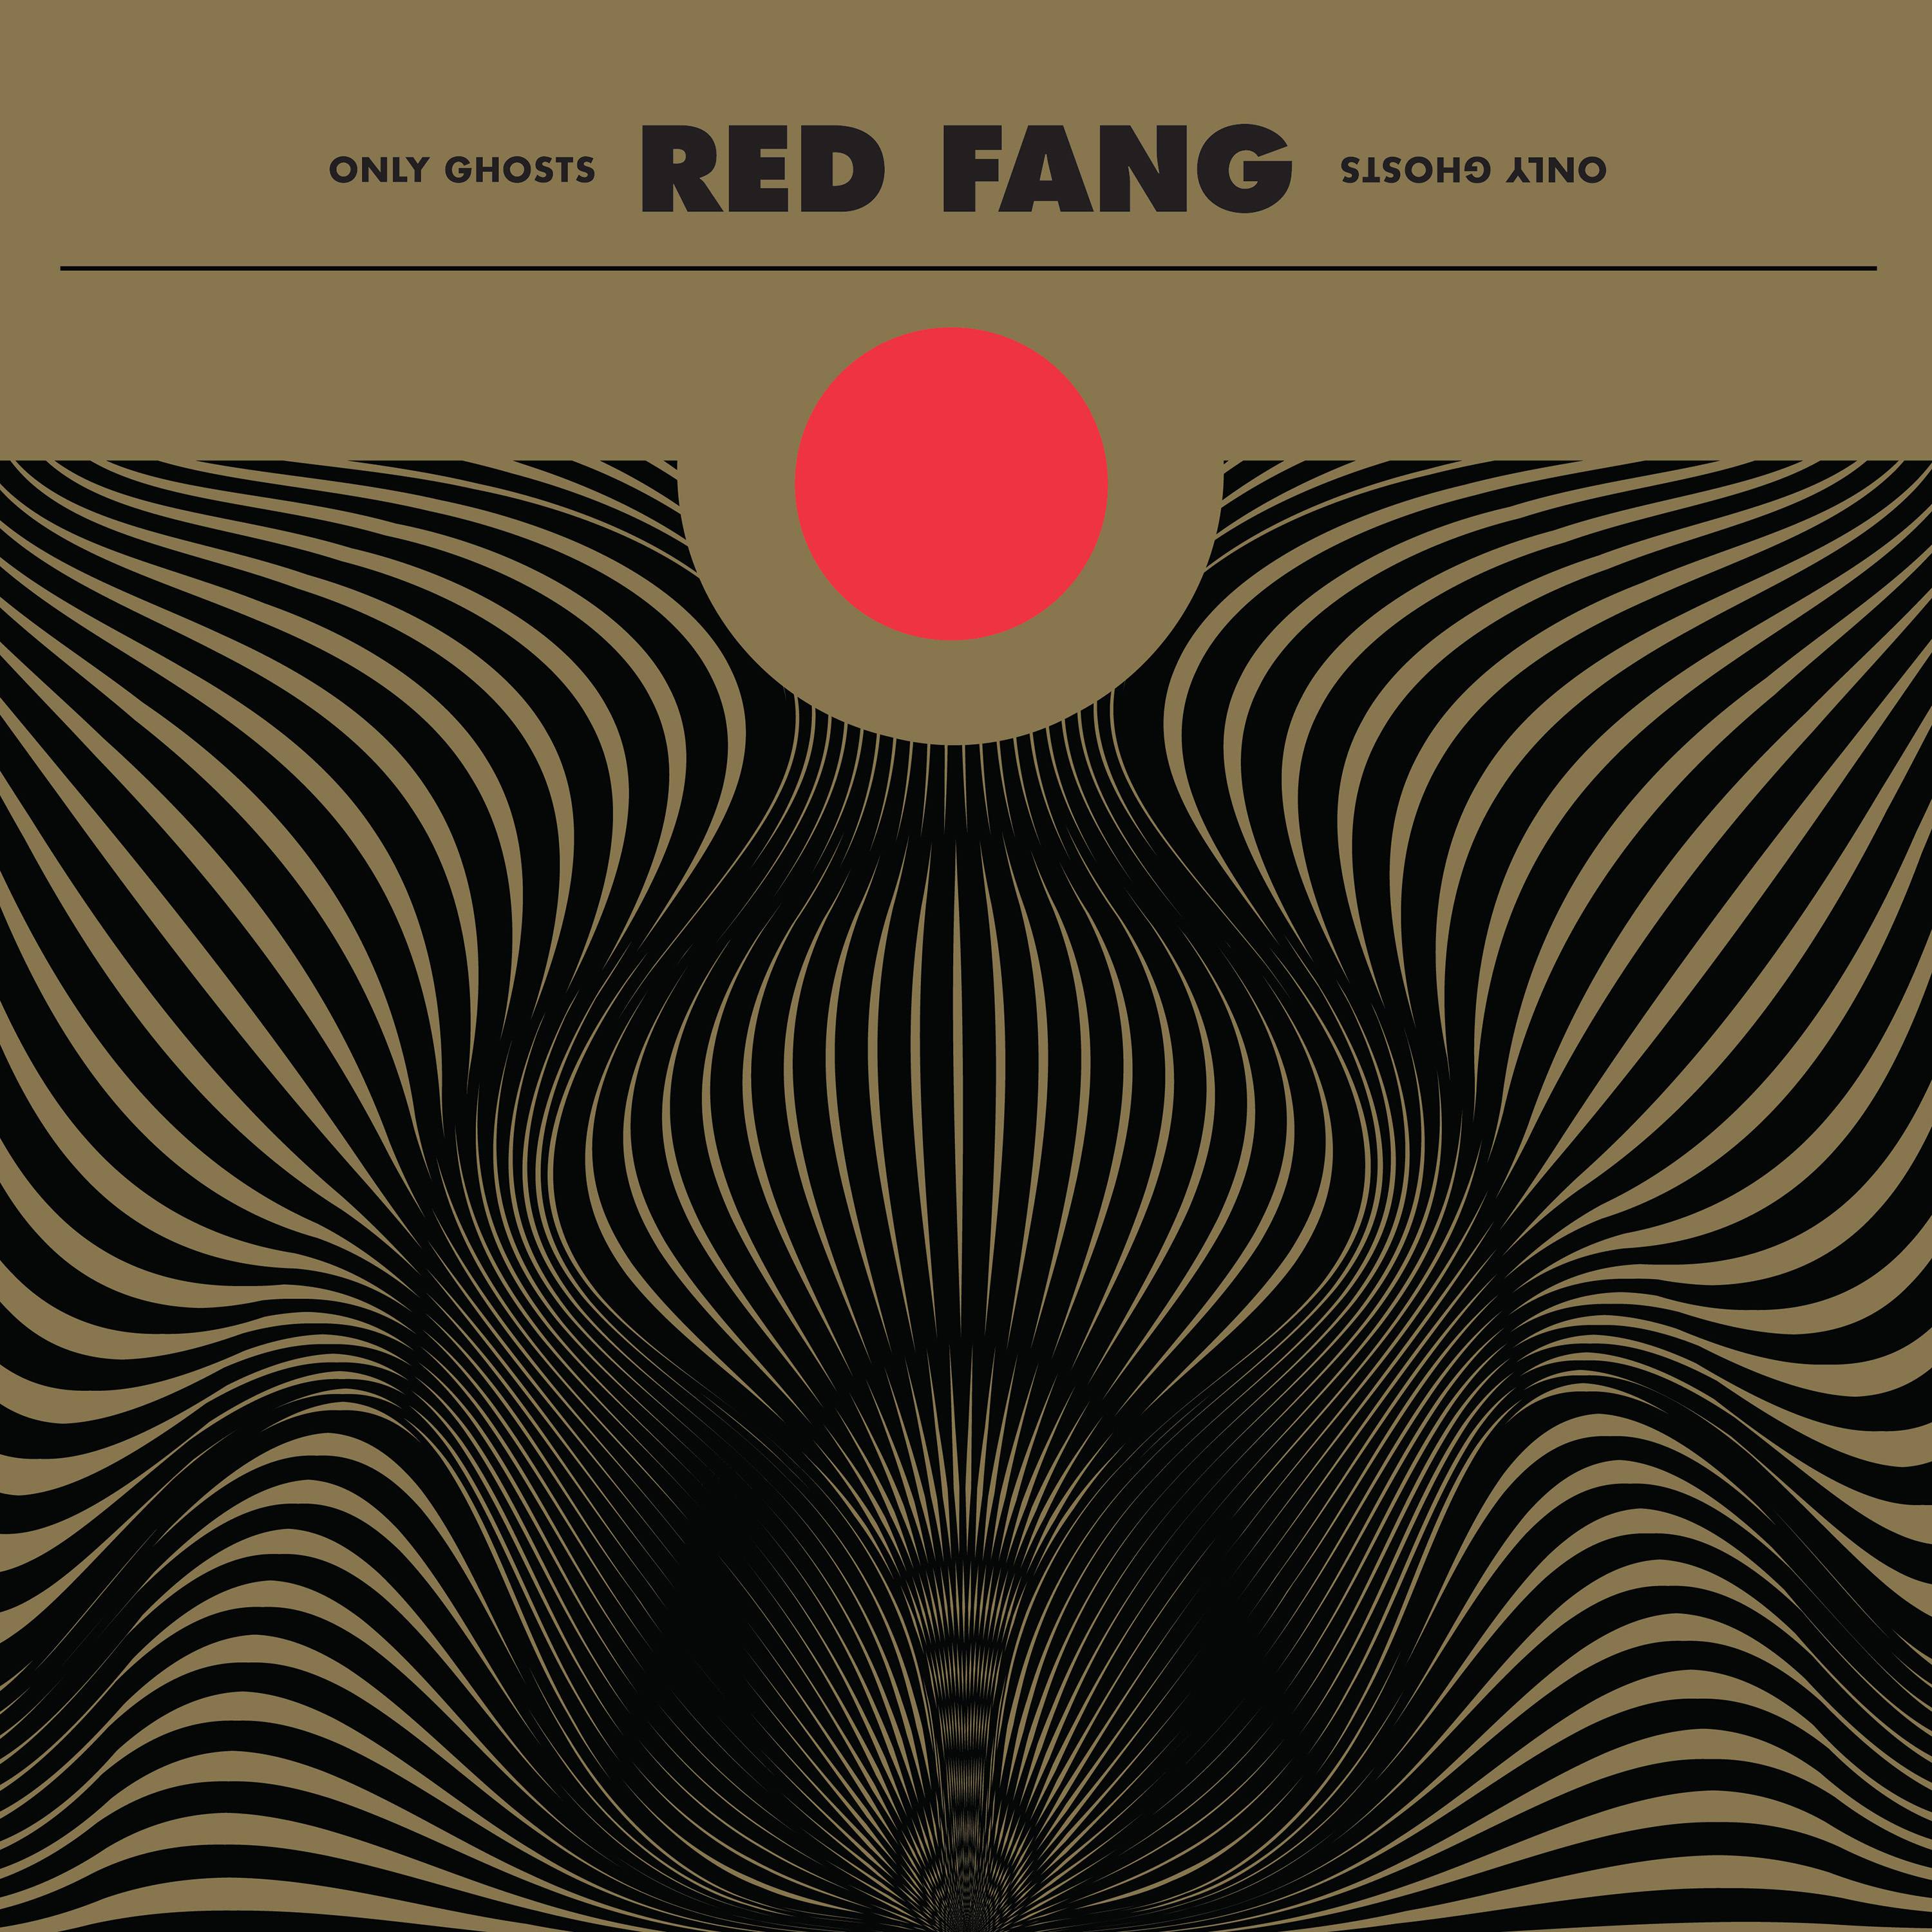 Red Fang - Only Ghosts {Deluxe Edition} (2016) [FLAC 24bit/88,2kHz]